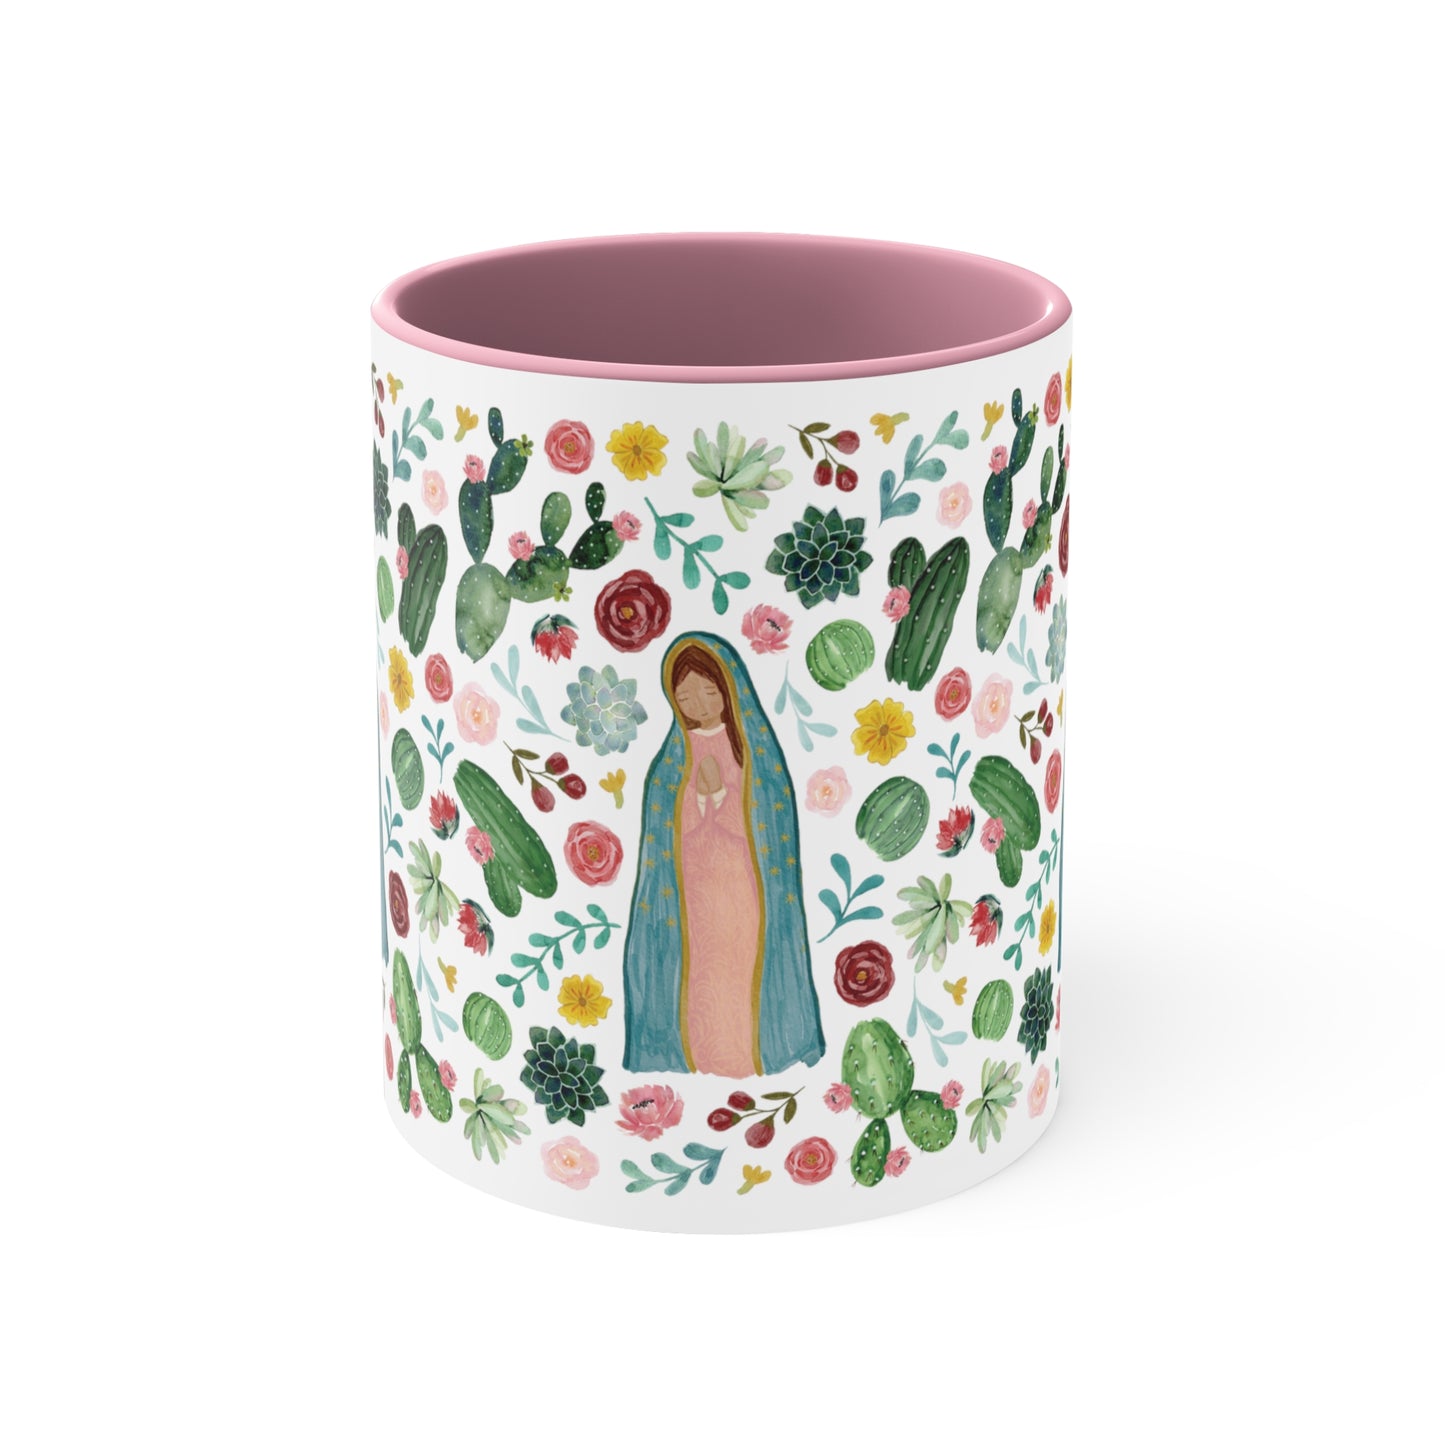 Virgencita de Guadalupe Coffee Mug, 11oz. Flowers and lady Guadalupe ceramic cup for her.